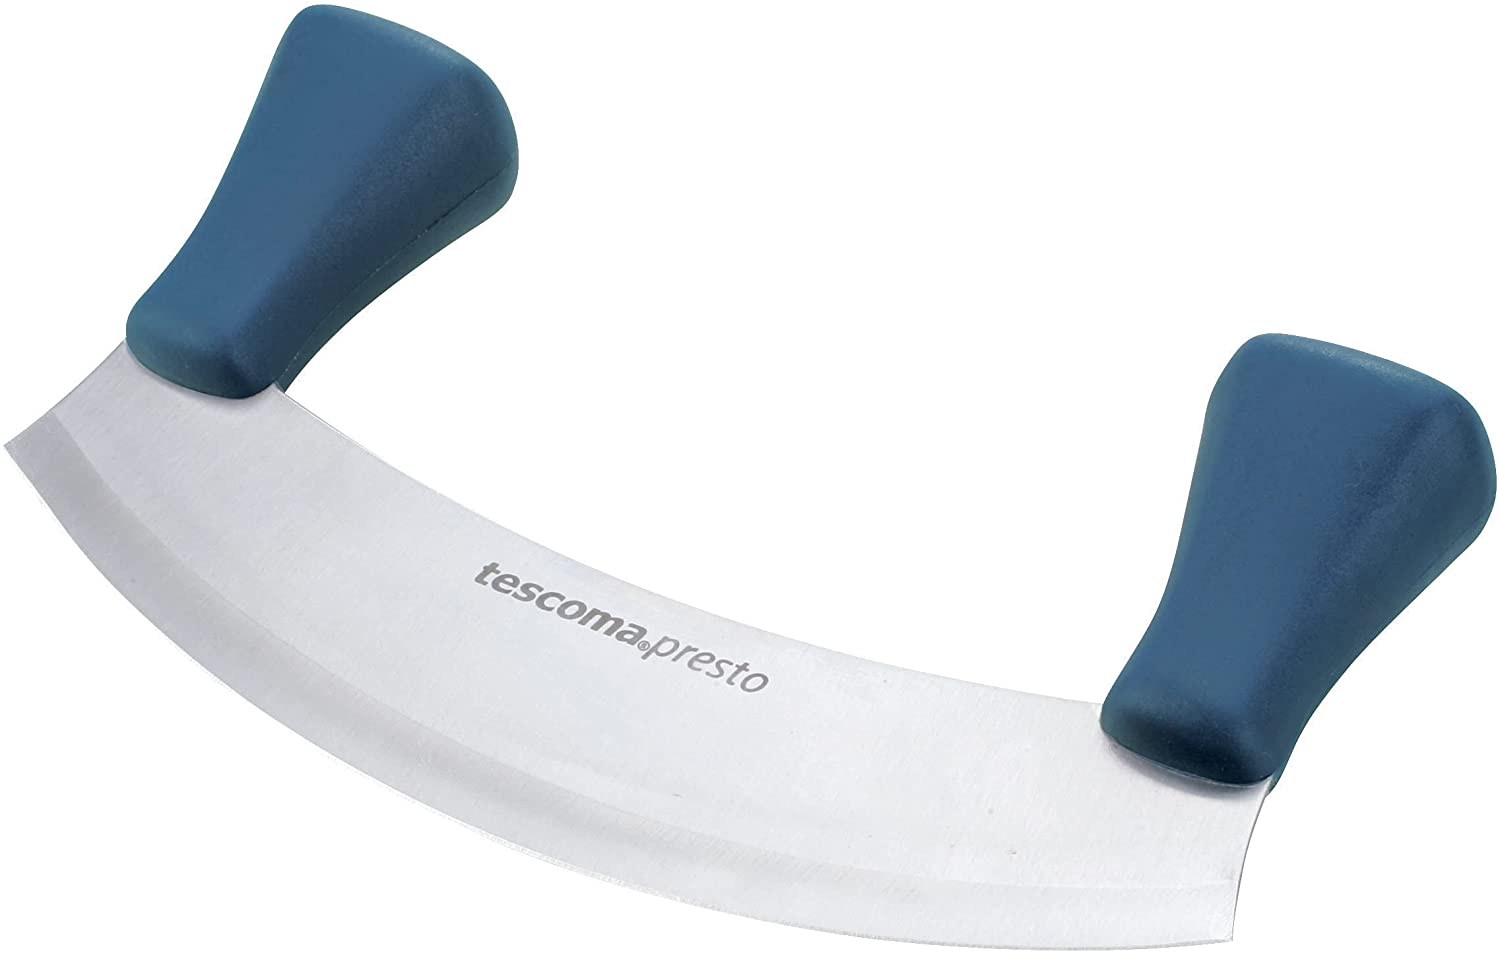 Tescoma Presto Silver Stainless Steel Weighing Knife